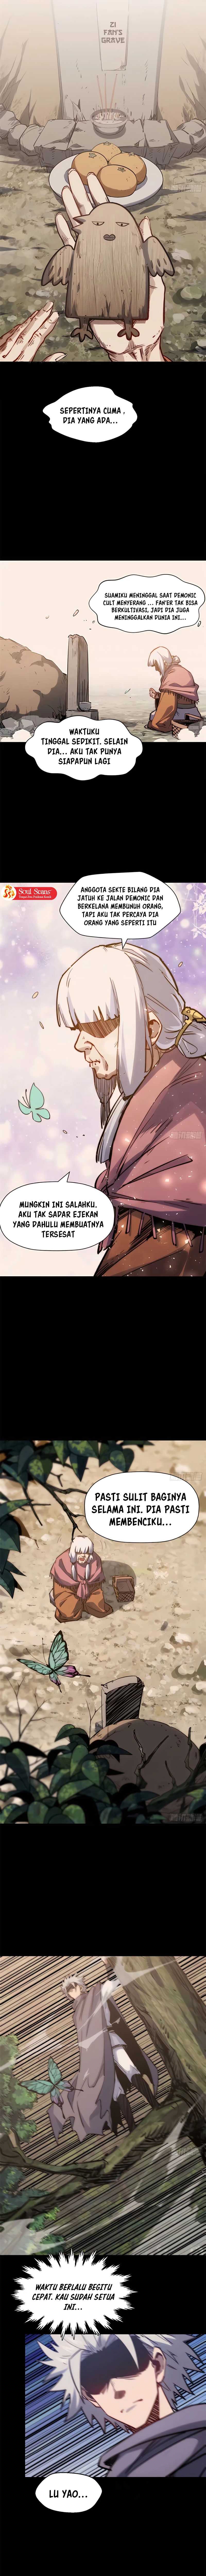 Dilarang COPAS - situs resmi www.mangacanblog.com - Komik top tier providence secretly cultivate for a thousand years 100 - chapter 100 101 Indonesia top tier providence secretly cultivate for a thousand years 100 - chapter 100 Terbaru 11|Baca Manga Komik Indonesia|Mangacan